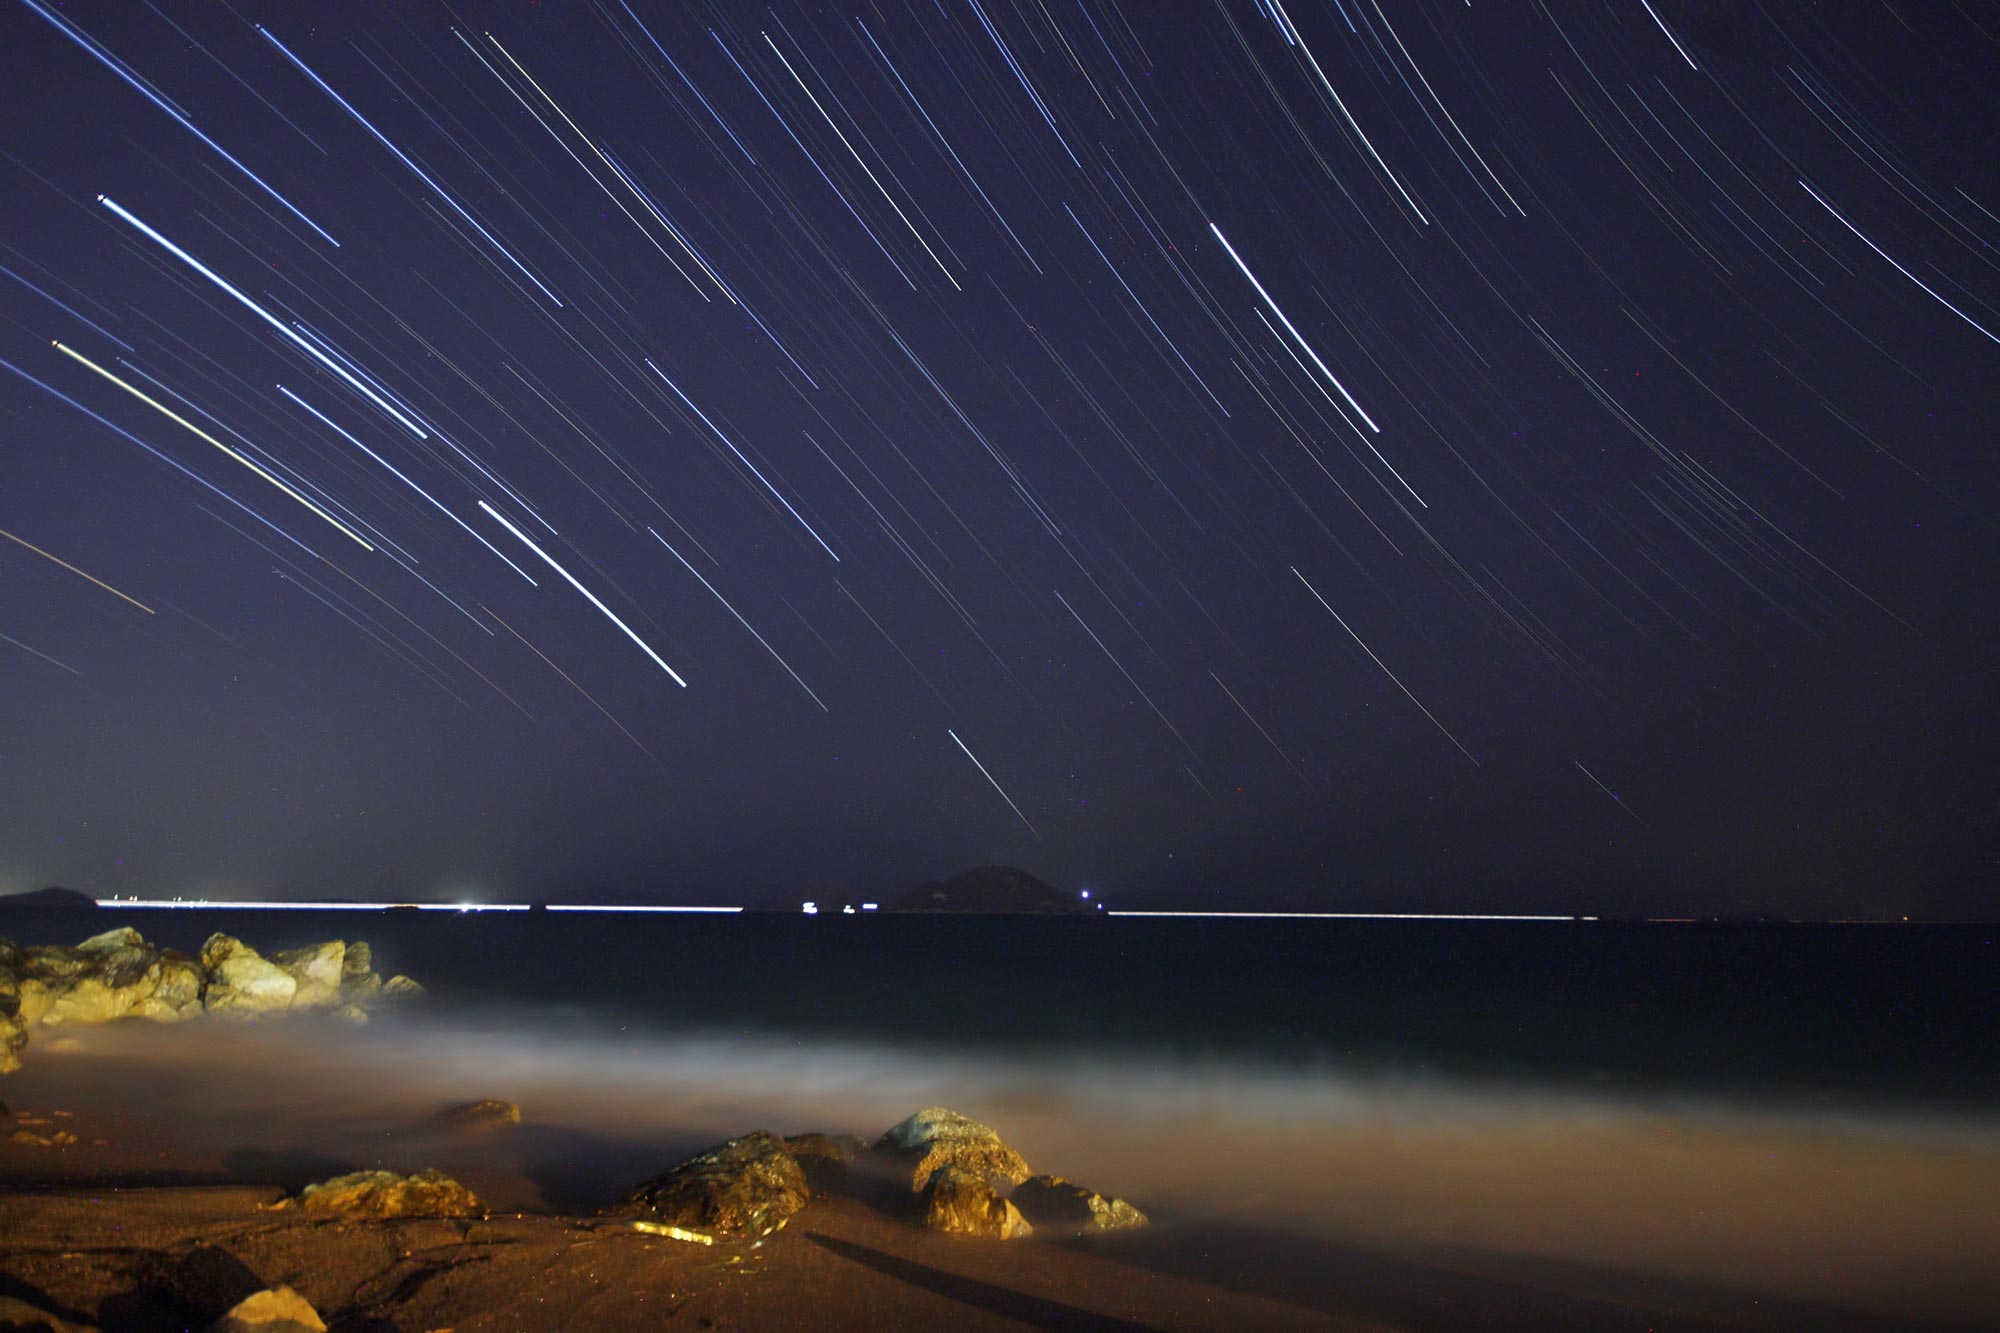 Time-lapse photo of the Perseid meteor shower